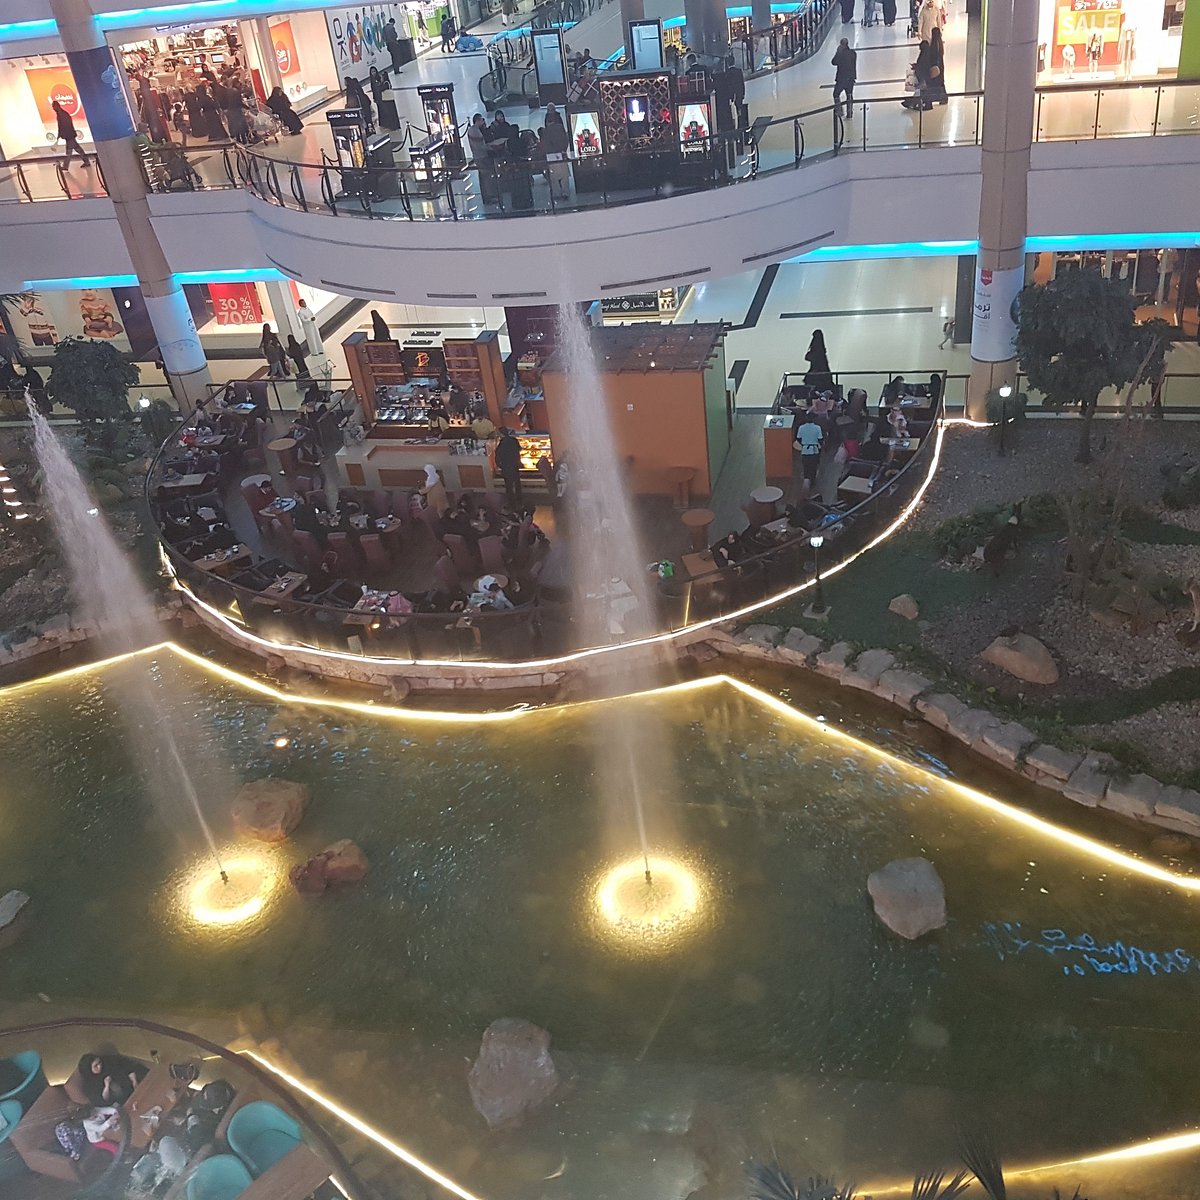 Riyadh Gallery Mall - All You Need to Know BEFORE You Go